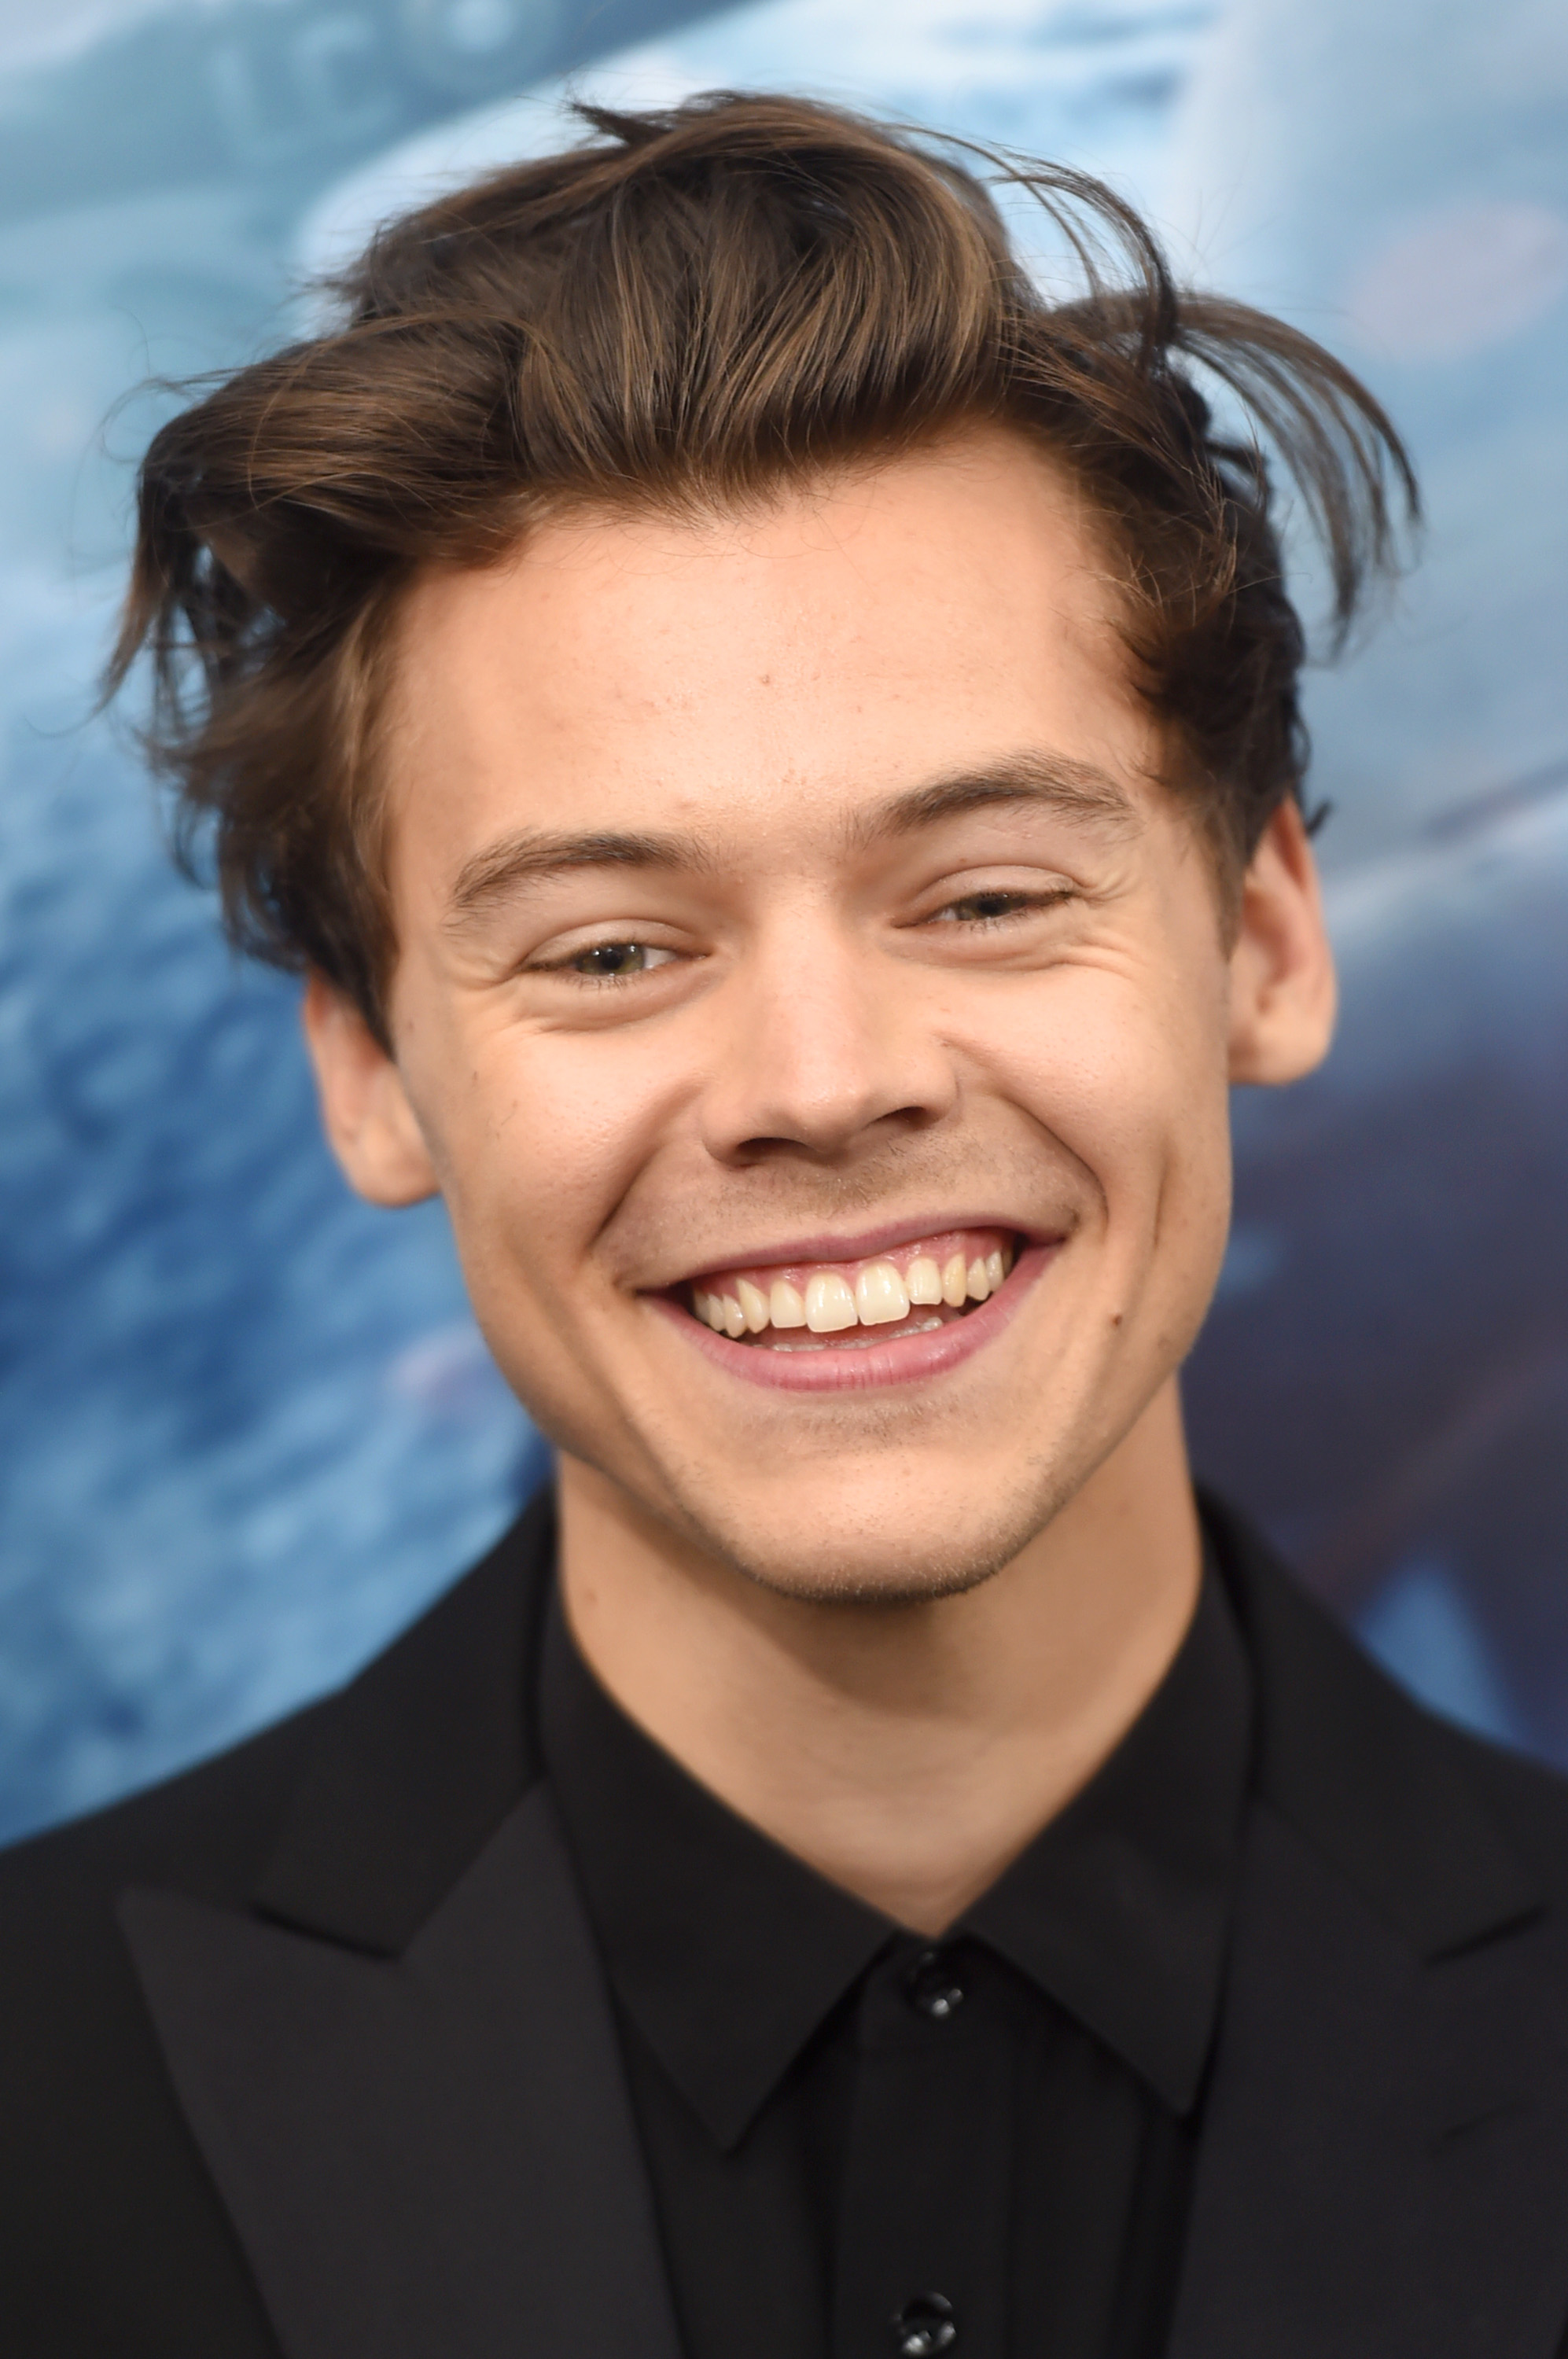 Harry Styles during the "Dunkirk" New York premiere on July 18, 2017, in New York City | Source: Getty Images